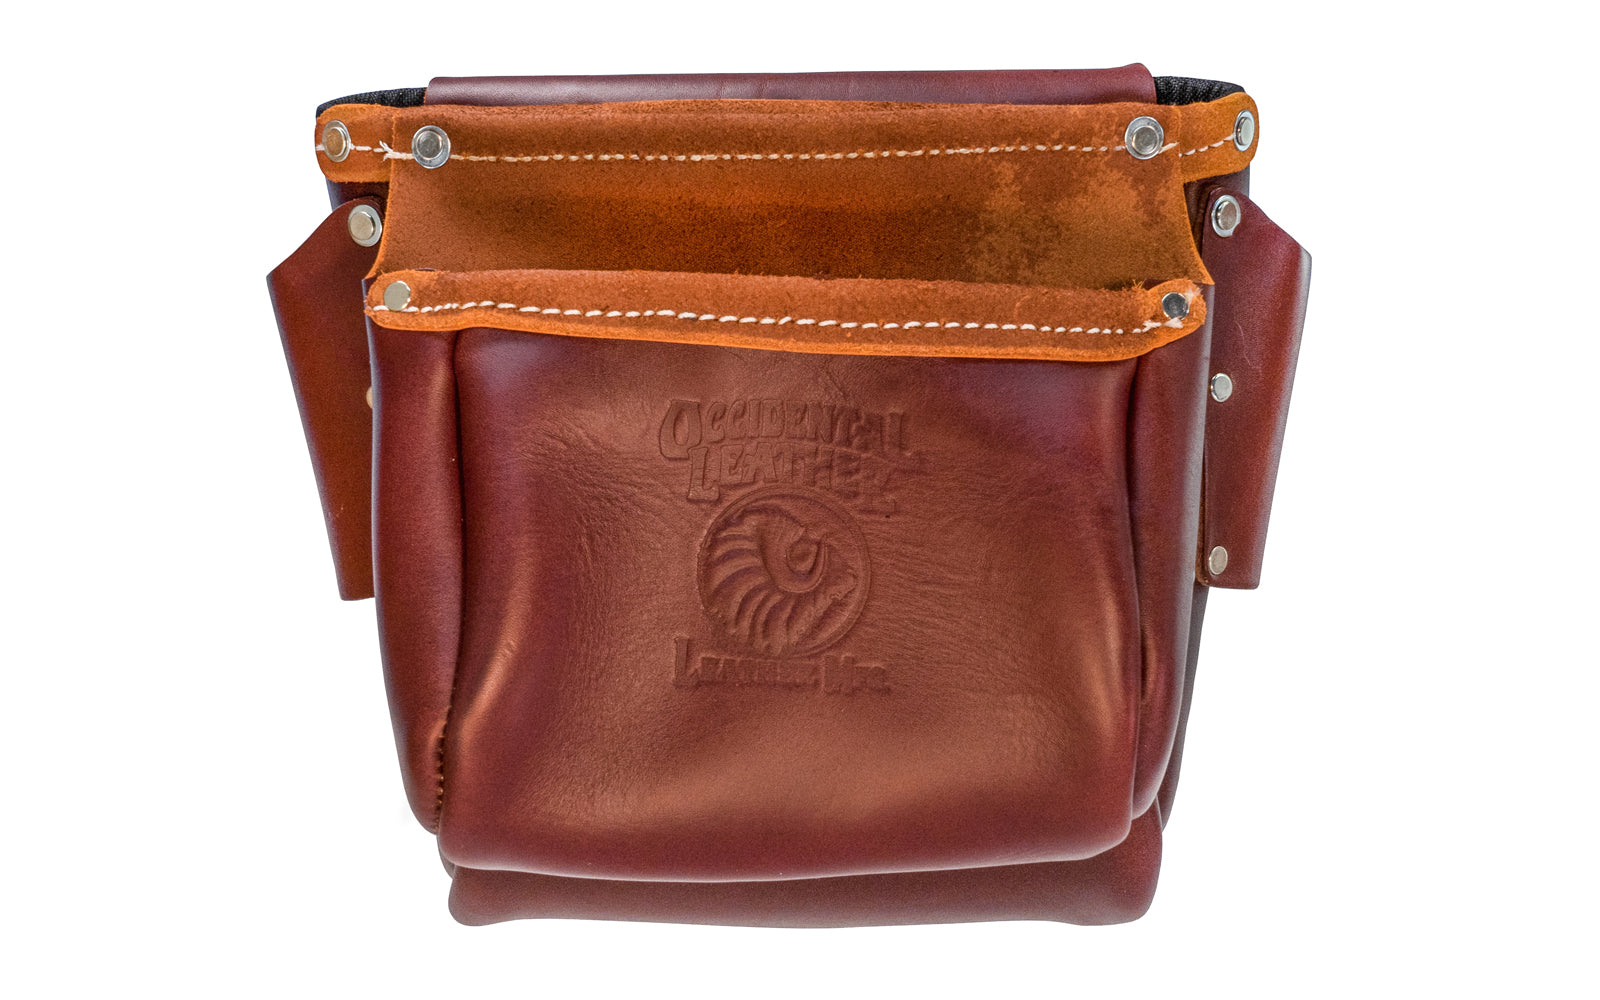 Occidental Leather Iron Worker's Leather Bolt Bag with Outer Bag